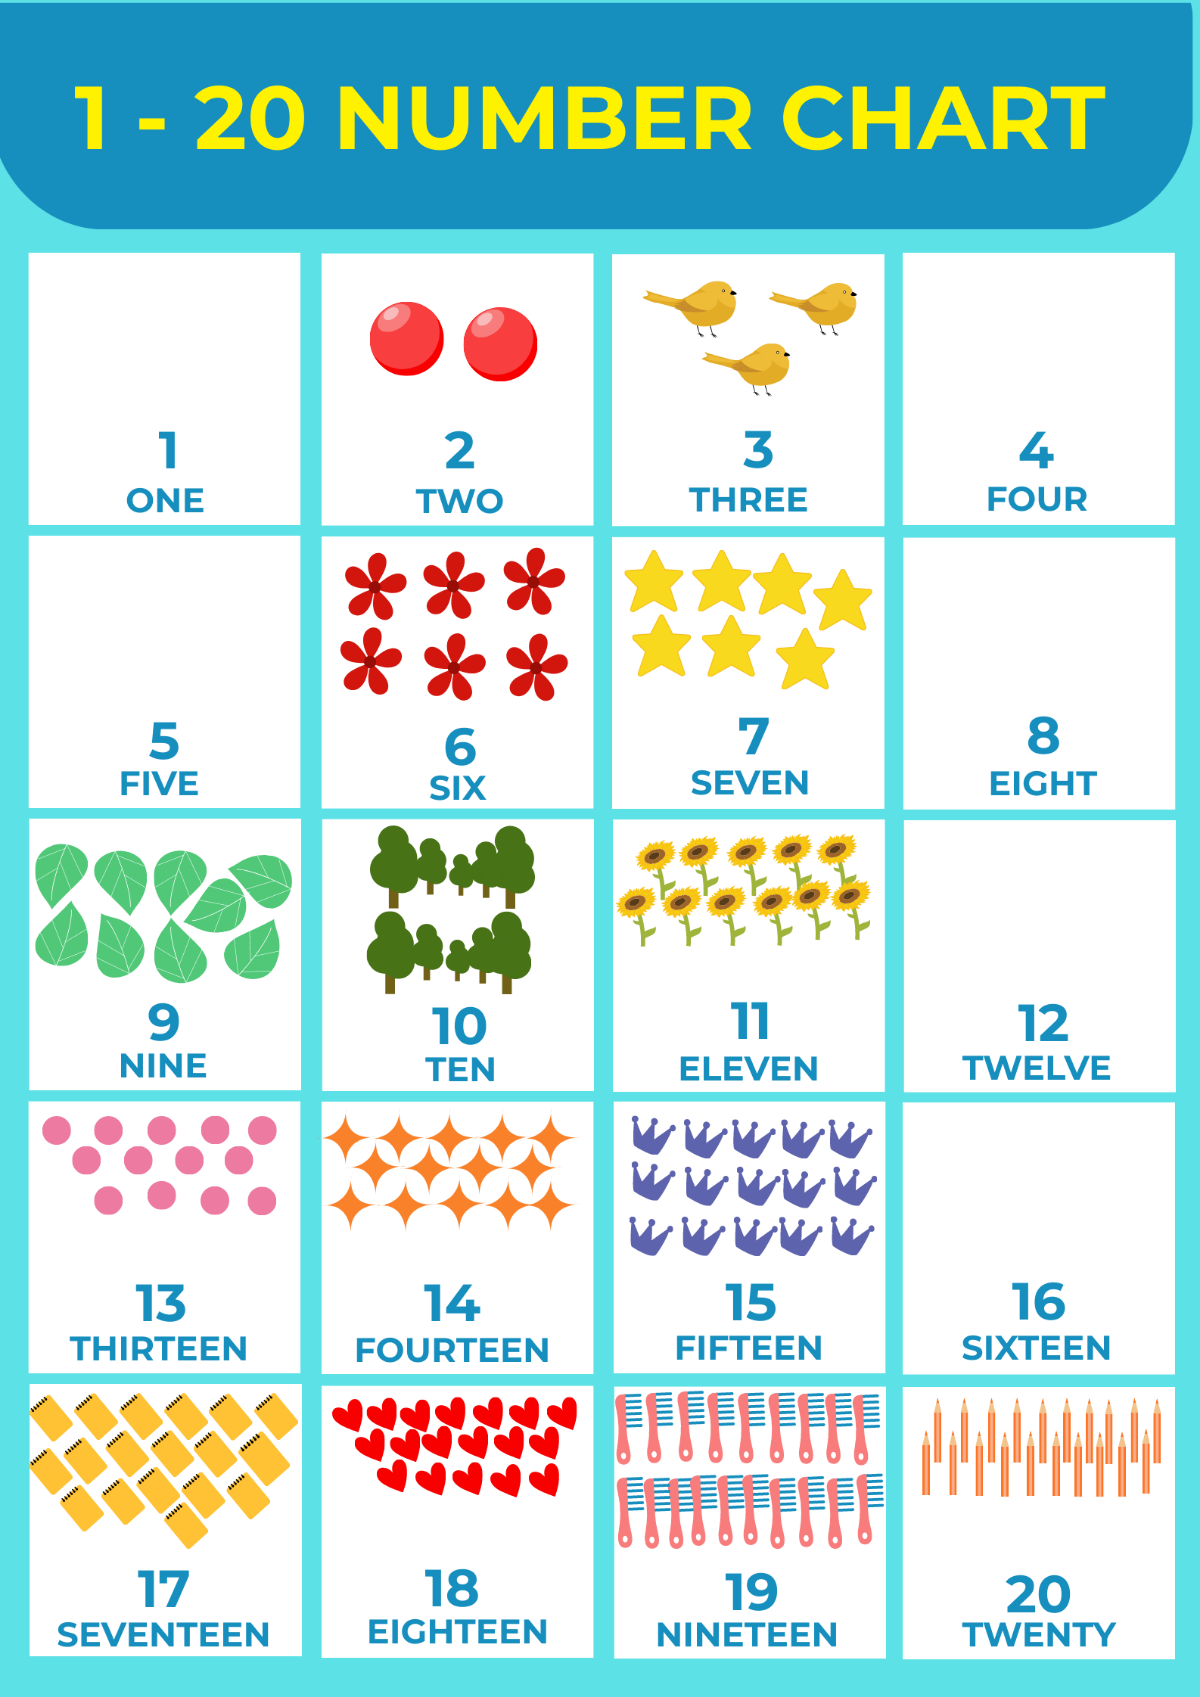 1-20 Number Chart Template